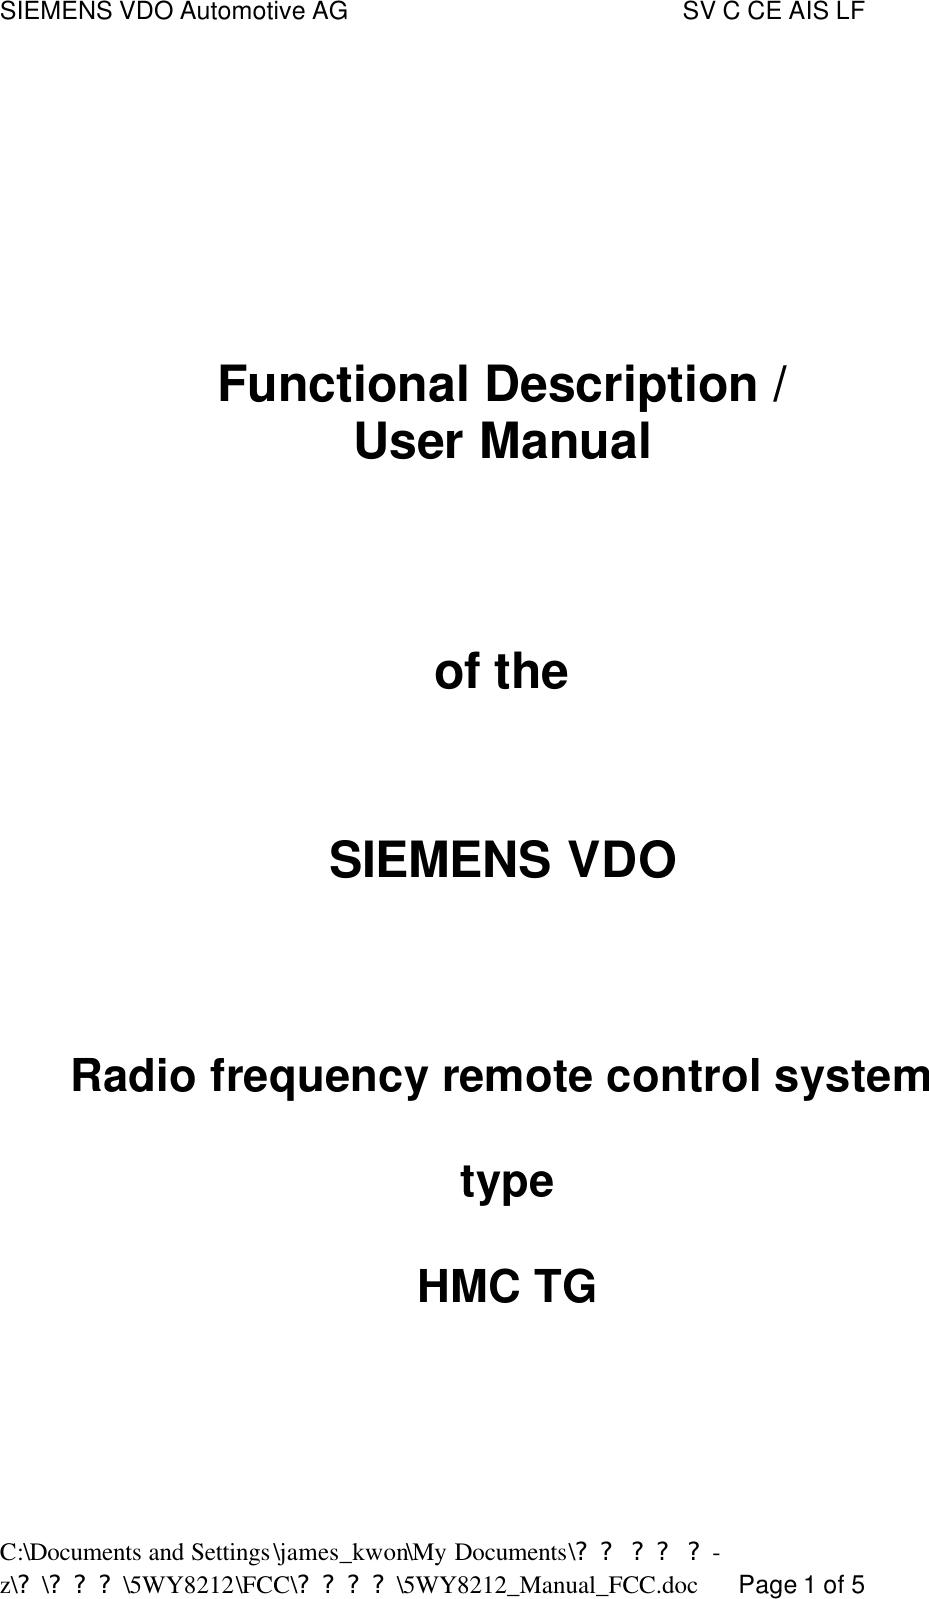 SIEMENS VDO Automotive AG    SV C CE AIS LF C:\Documents and Settings\james_kwon\My Documents\?? ?? ?-z\?\???\5WY8212\FCC\????\5WY8212_Manual_FCC.doc      Page 1 of 5       Functional Description / User Manual     of the   SIEMENS VDO    Radio frequency remote control system   type   HMC TG     